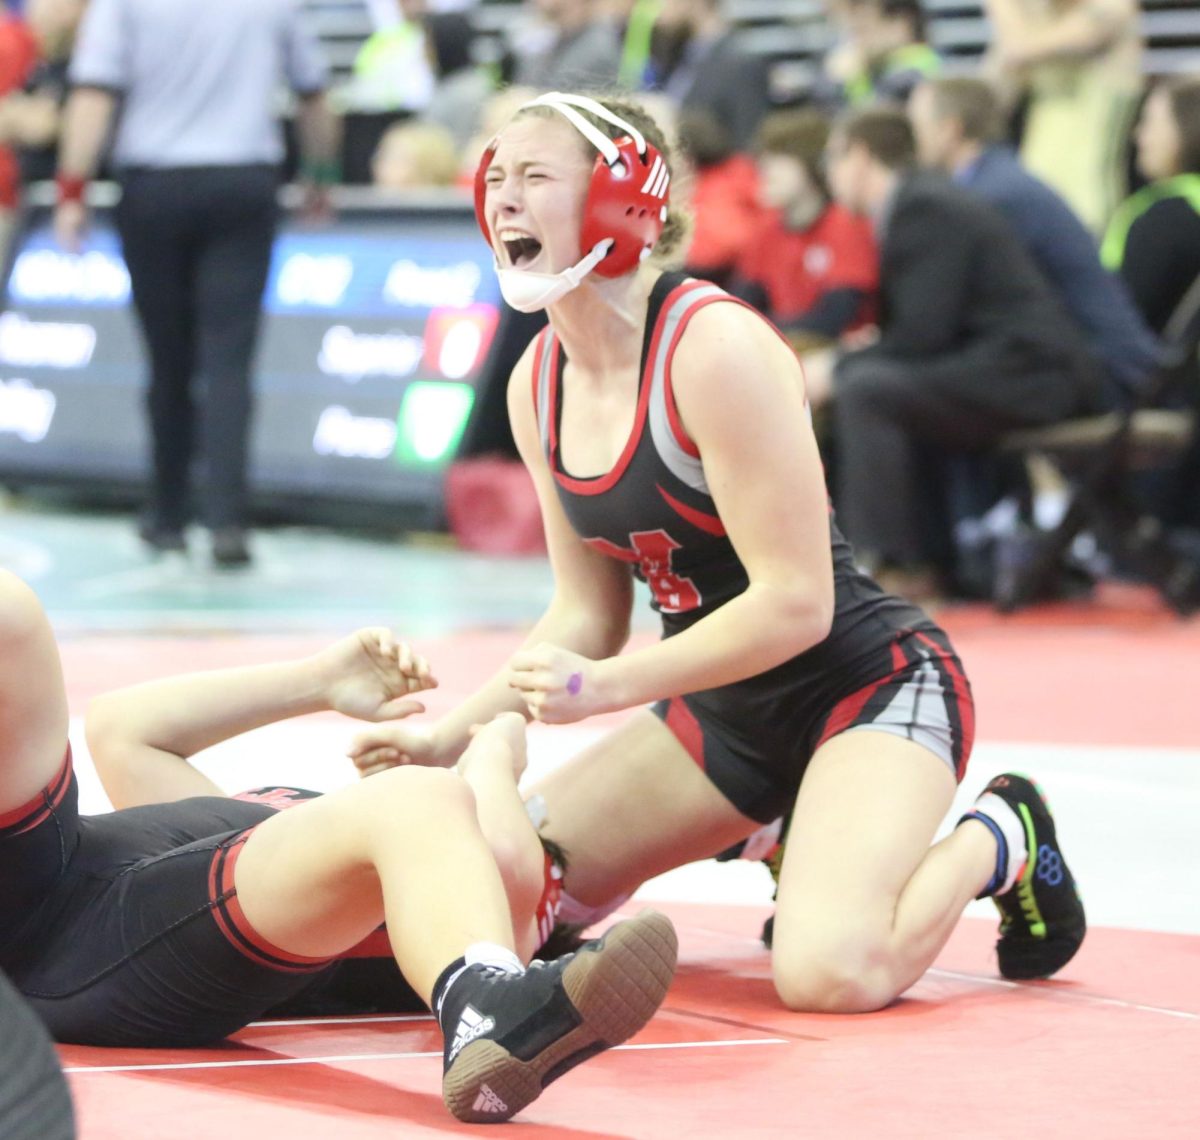 In her fifth place match at state last year, Jordyn Campbell celebrates after winning with a pin. Campbell set the school record of most pins in a season with 47.